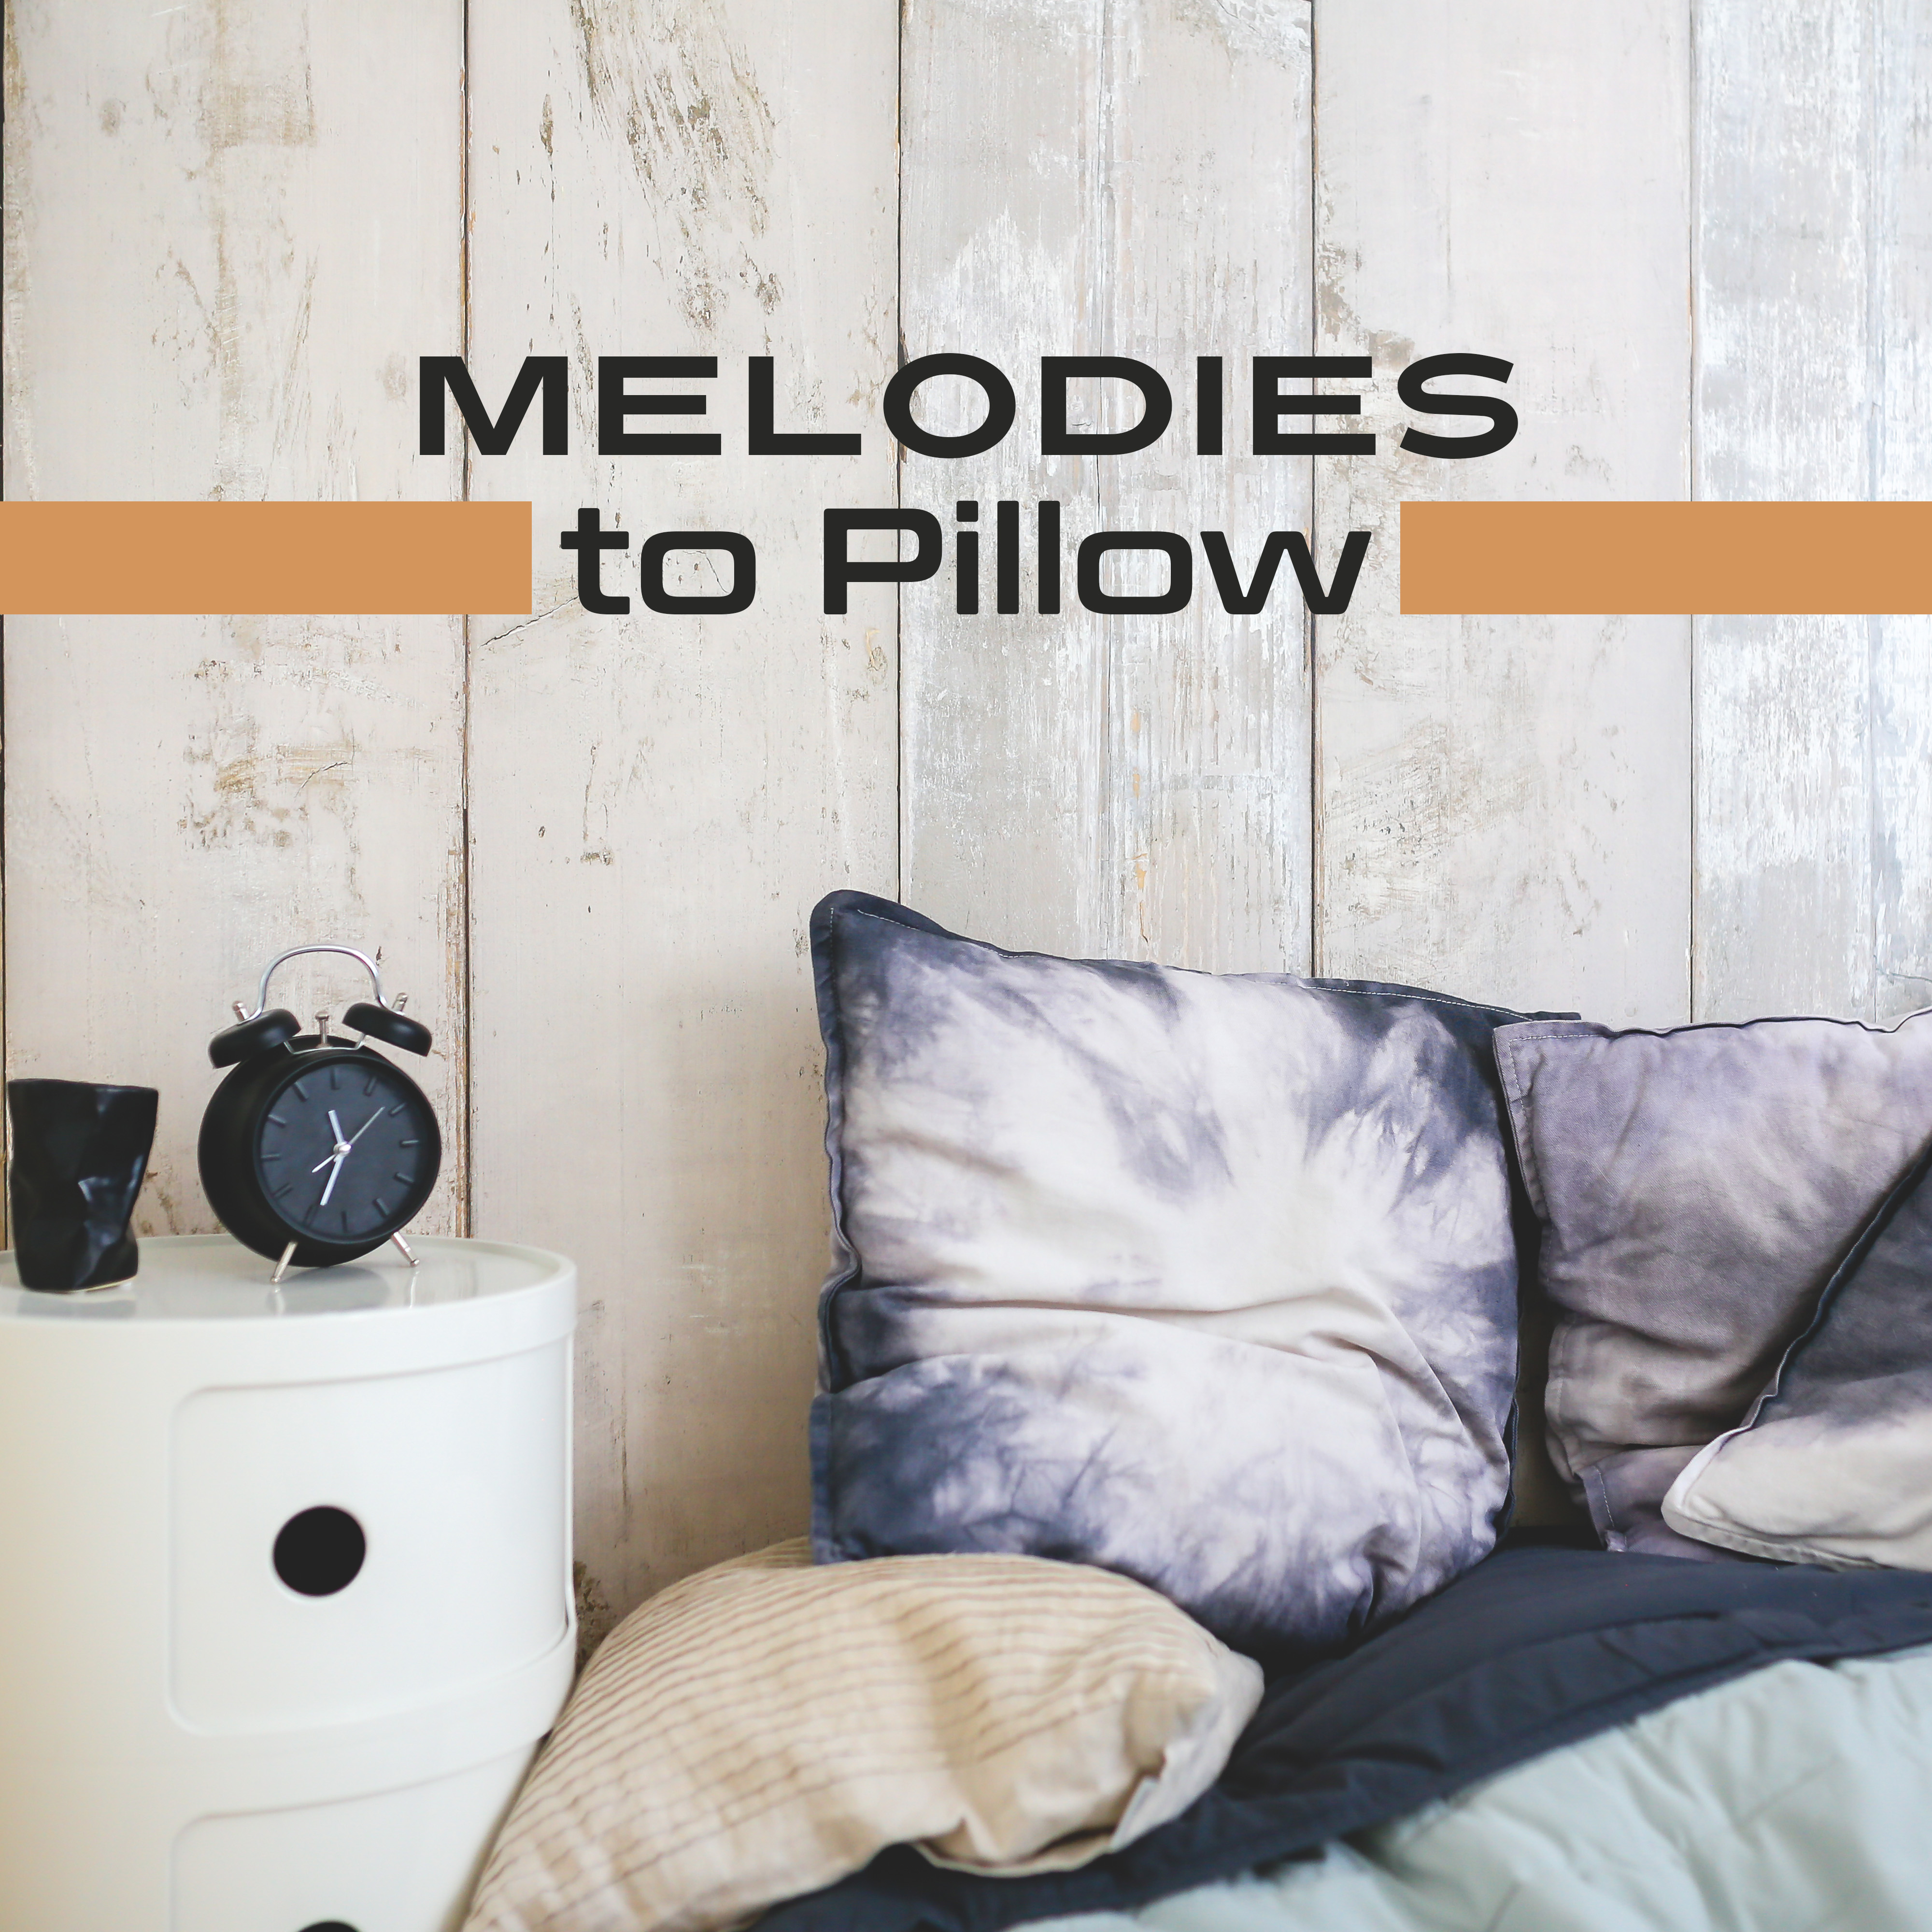 Melodies to Pillow – Soft Music for Sleep, Relaxing Night, Sweet Nap, Calm Sounds at Goodnight, Healing Lullabies to Bed